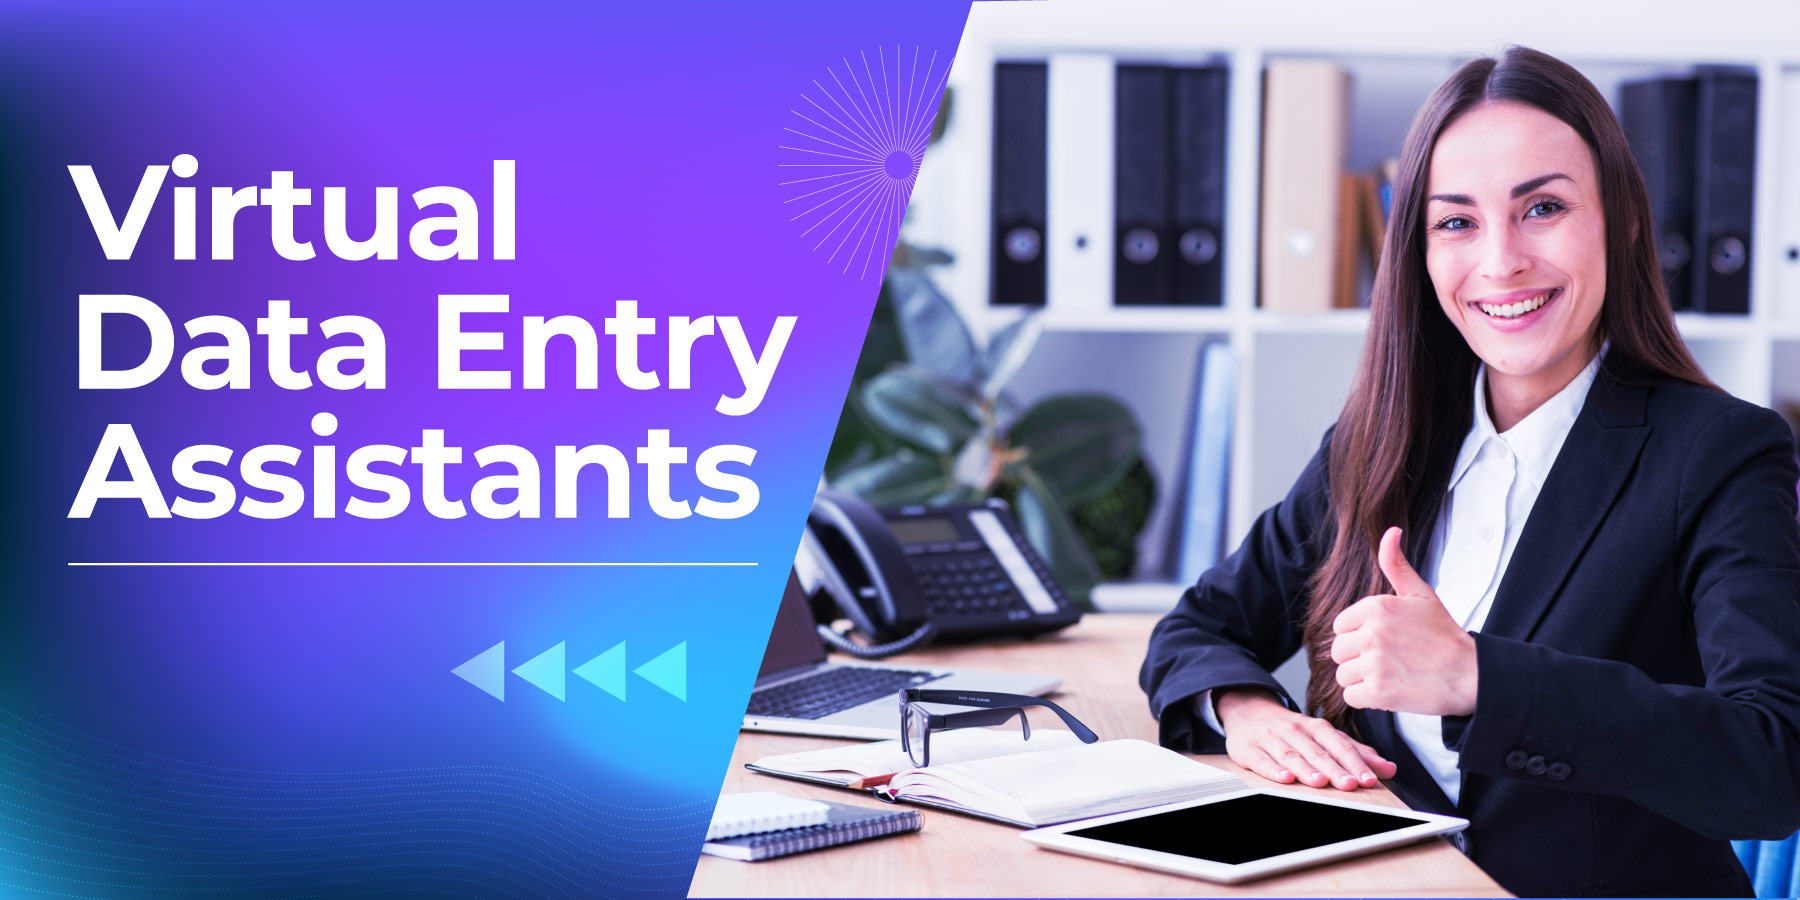 Virtual Data Entry Assistants